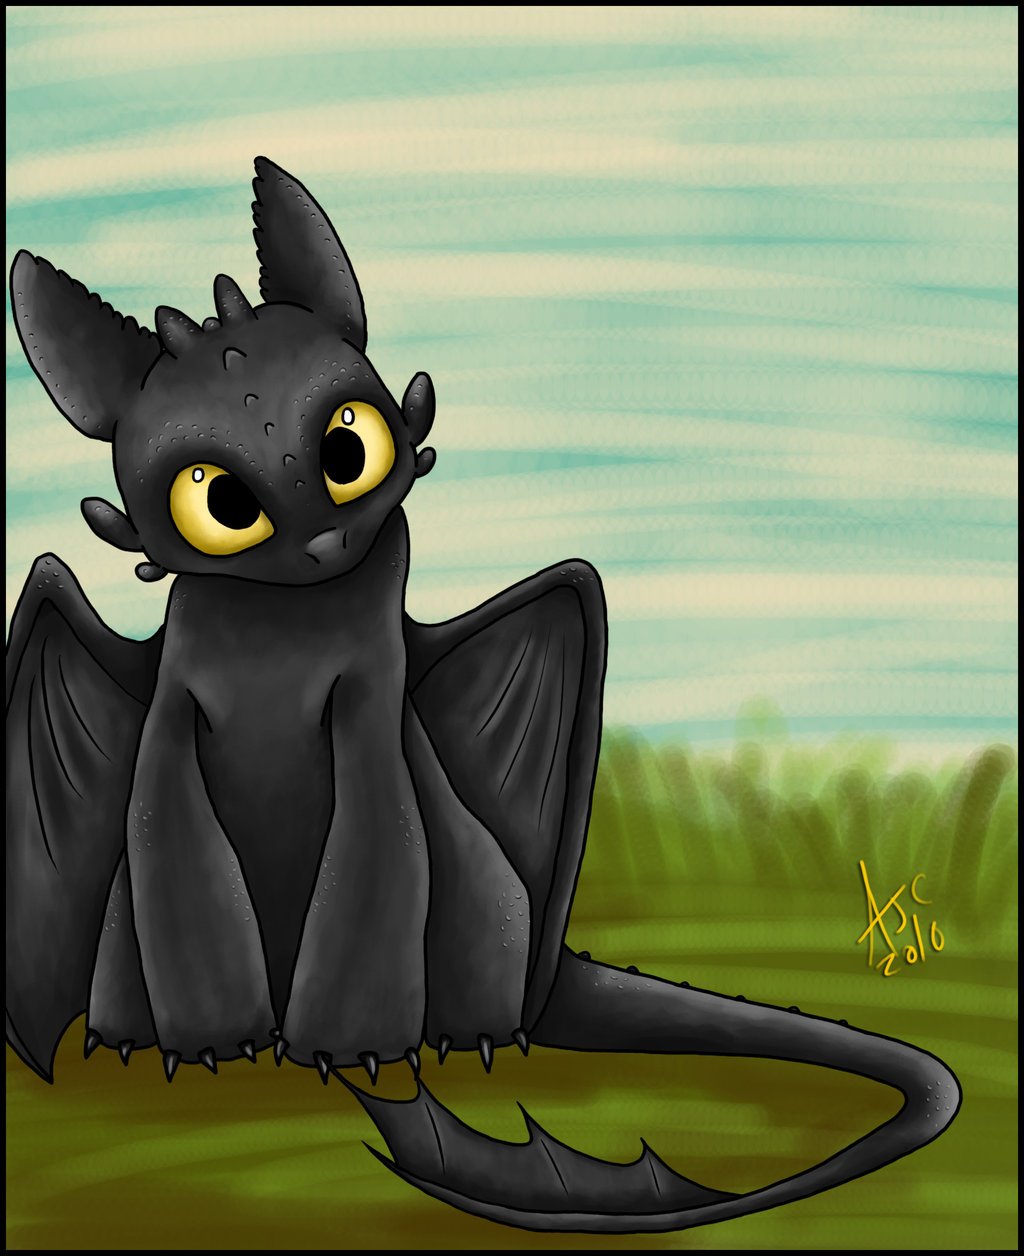 The Best of the Internets Wallpaper another toothless wallpaper